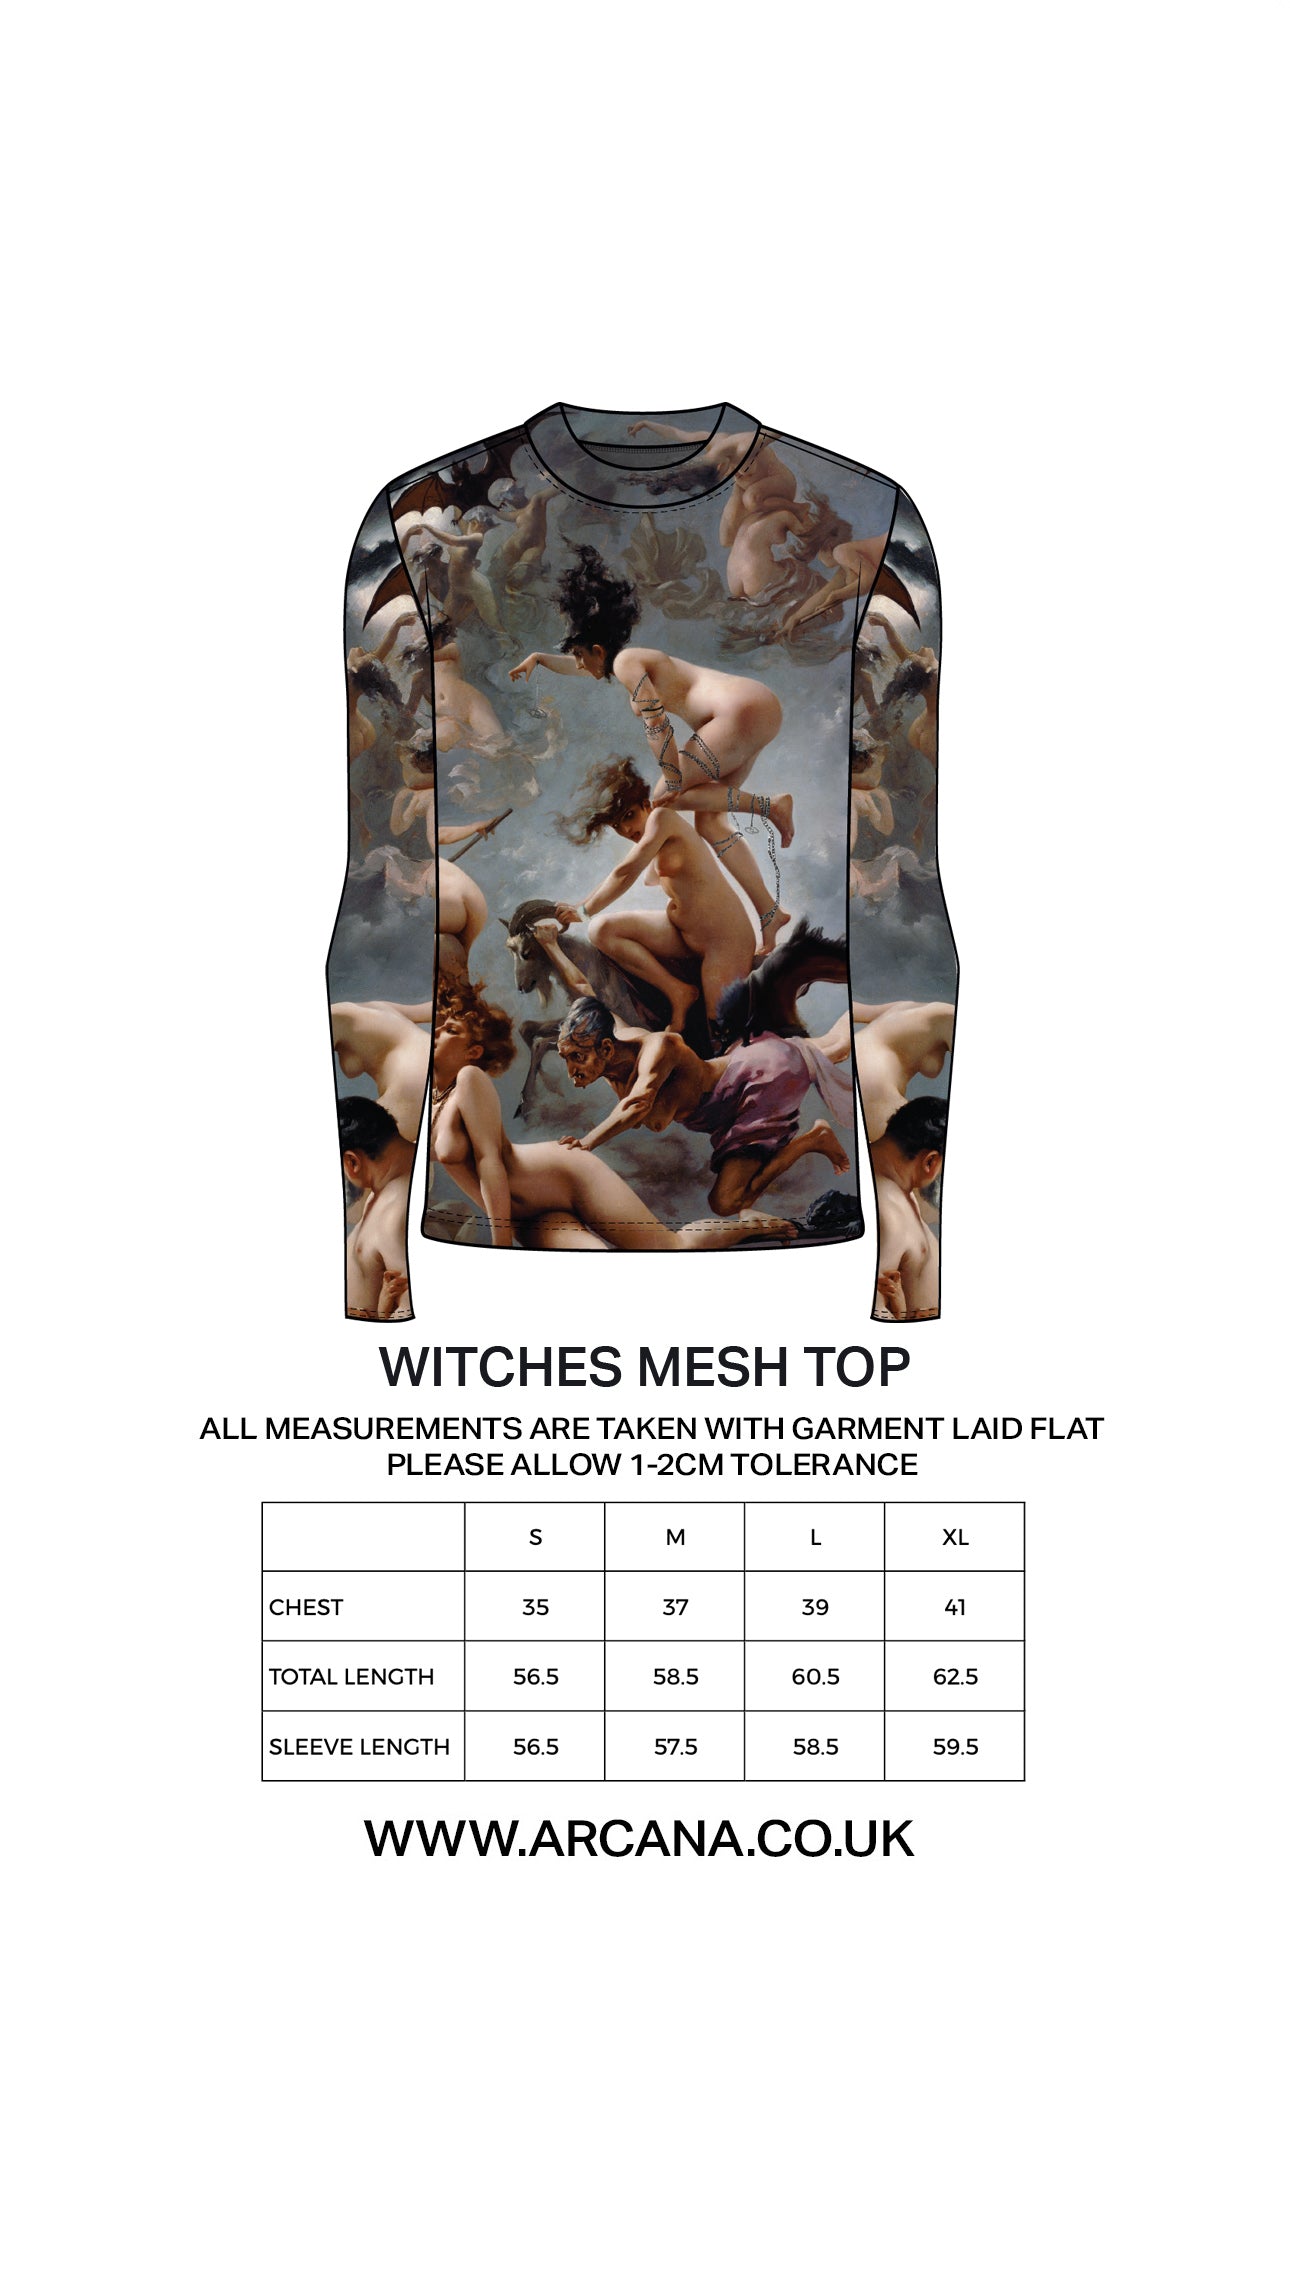 WITCHES MESH TOP